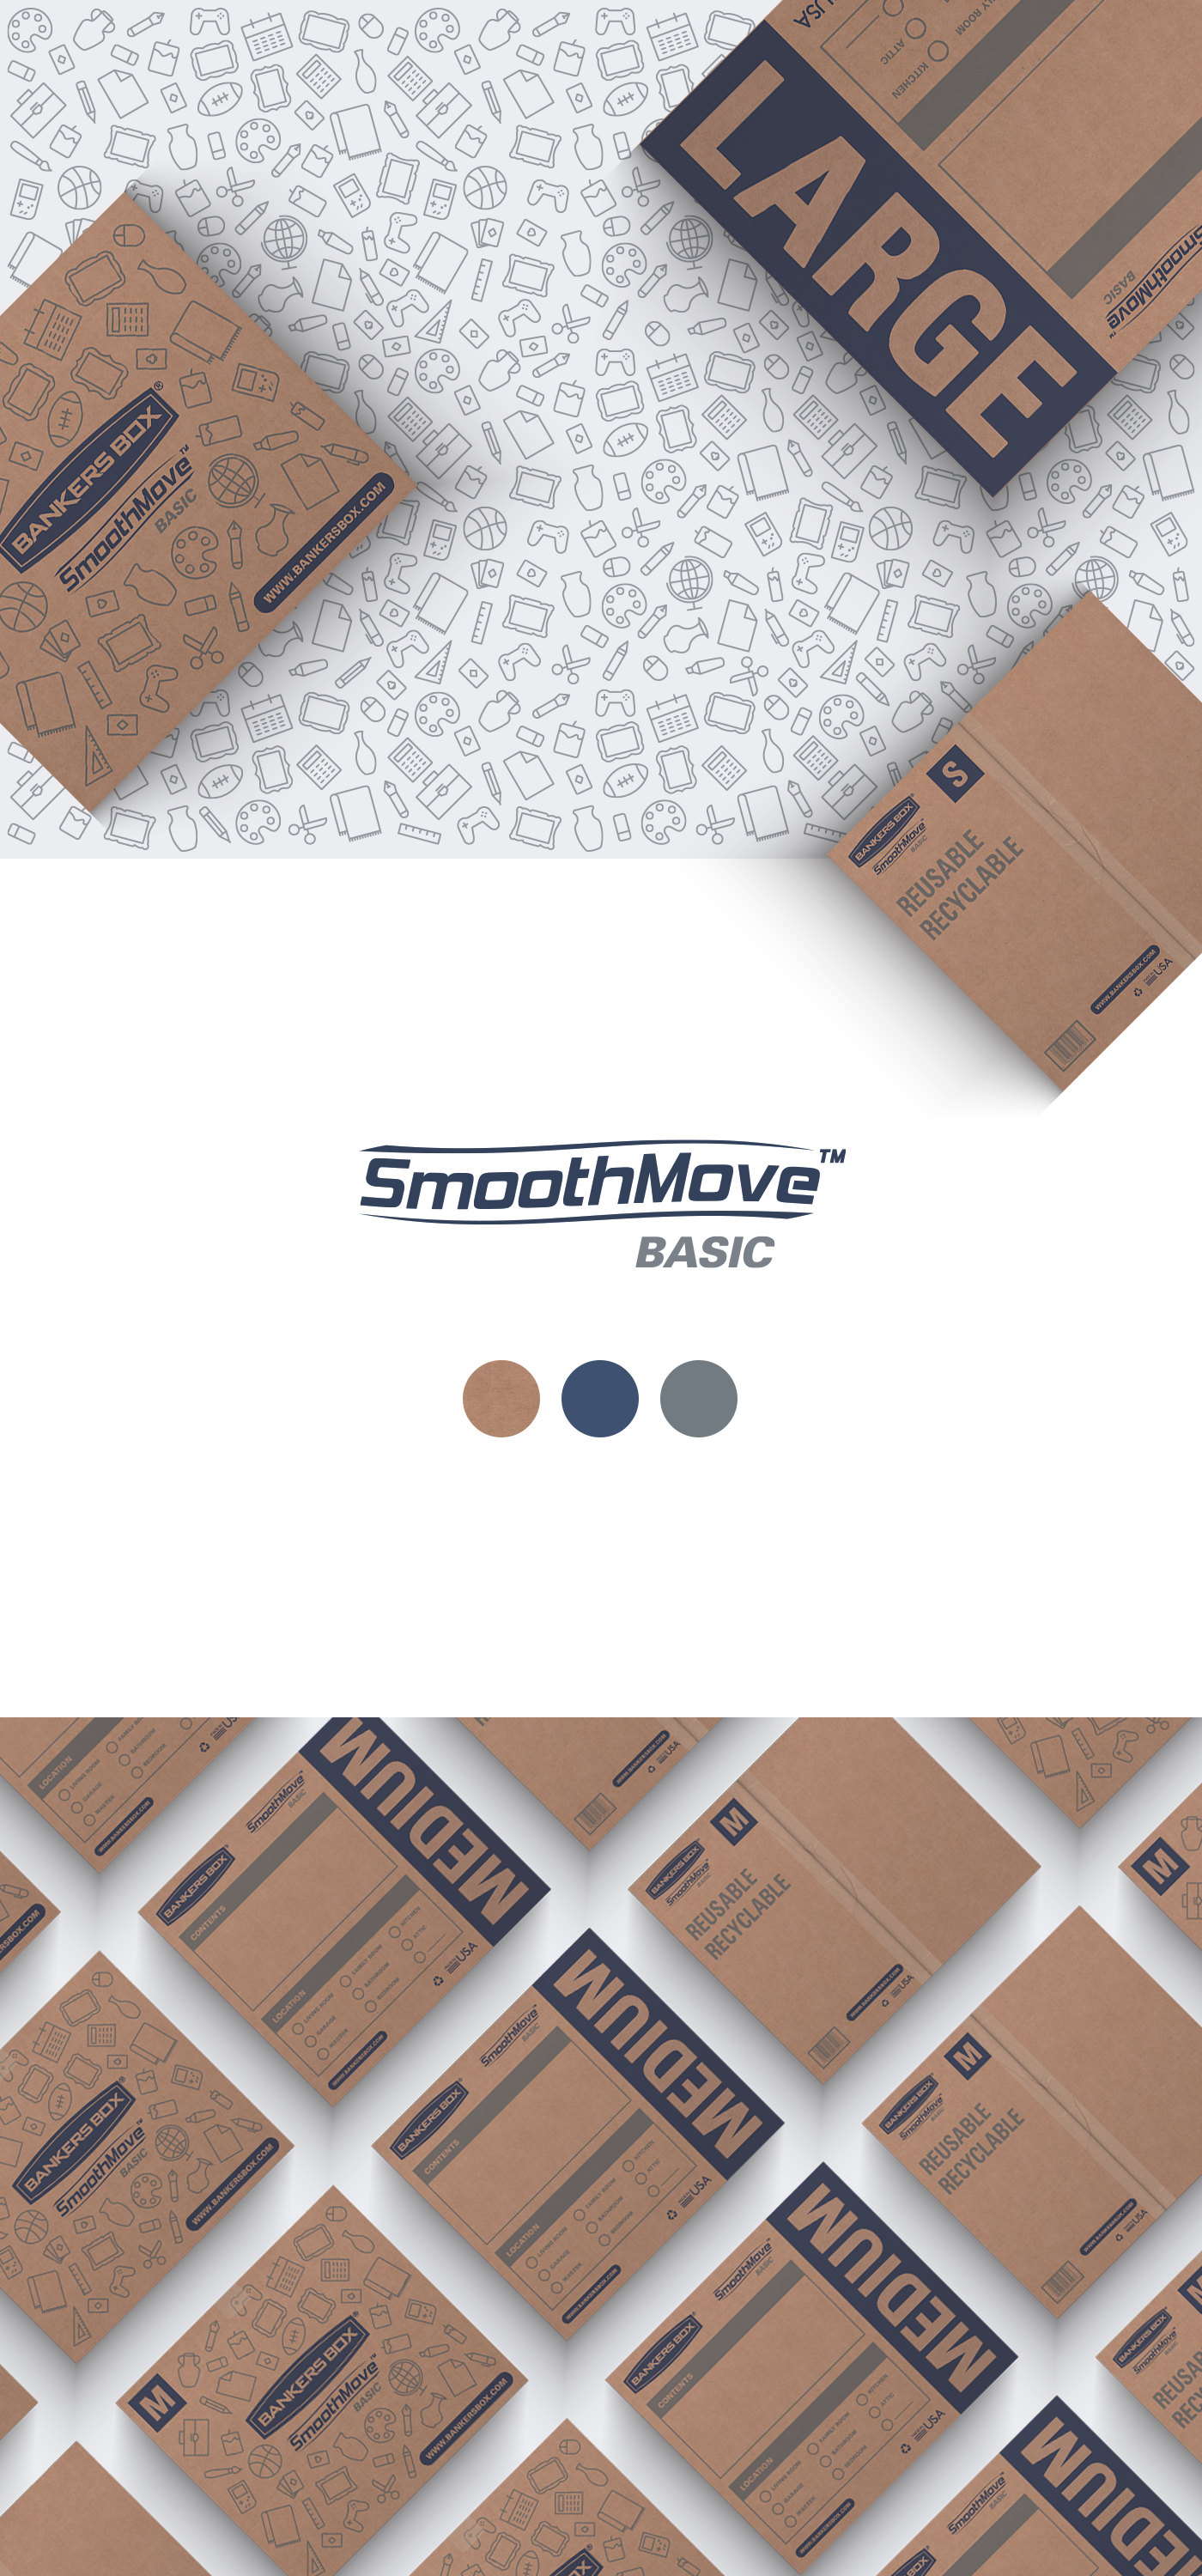 MOVING boxes cardboard modern iconography Items household fragile items Retail user feedback